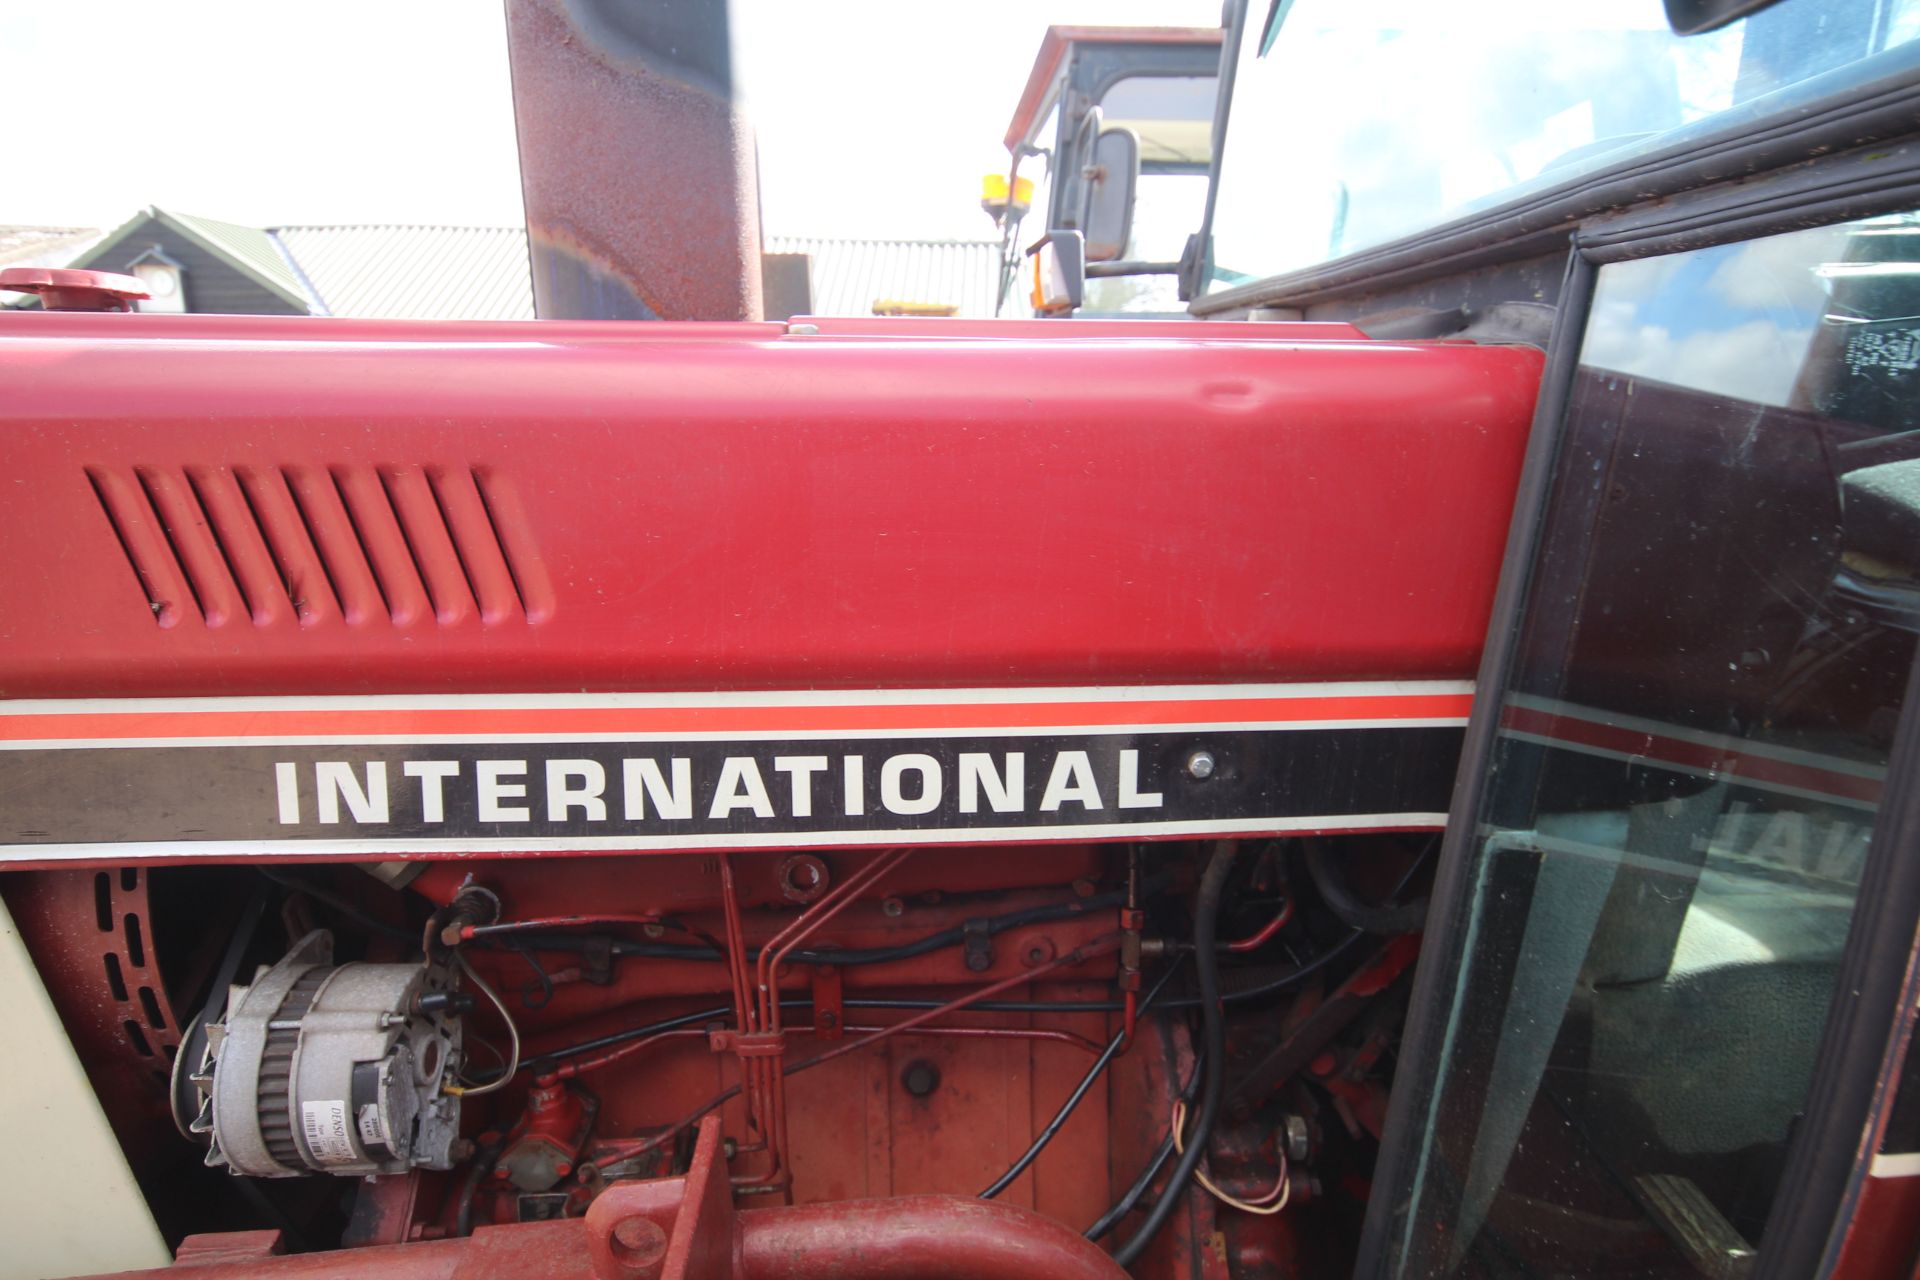 International Hydro 84 2WD tractor. Registration RGV 594W. Date of first registration 19/03/1981. - Image 41 of 62